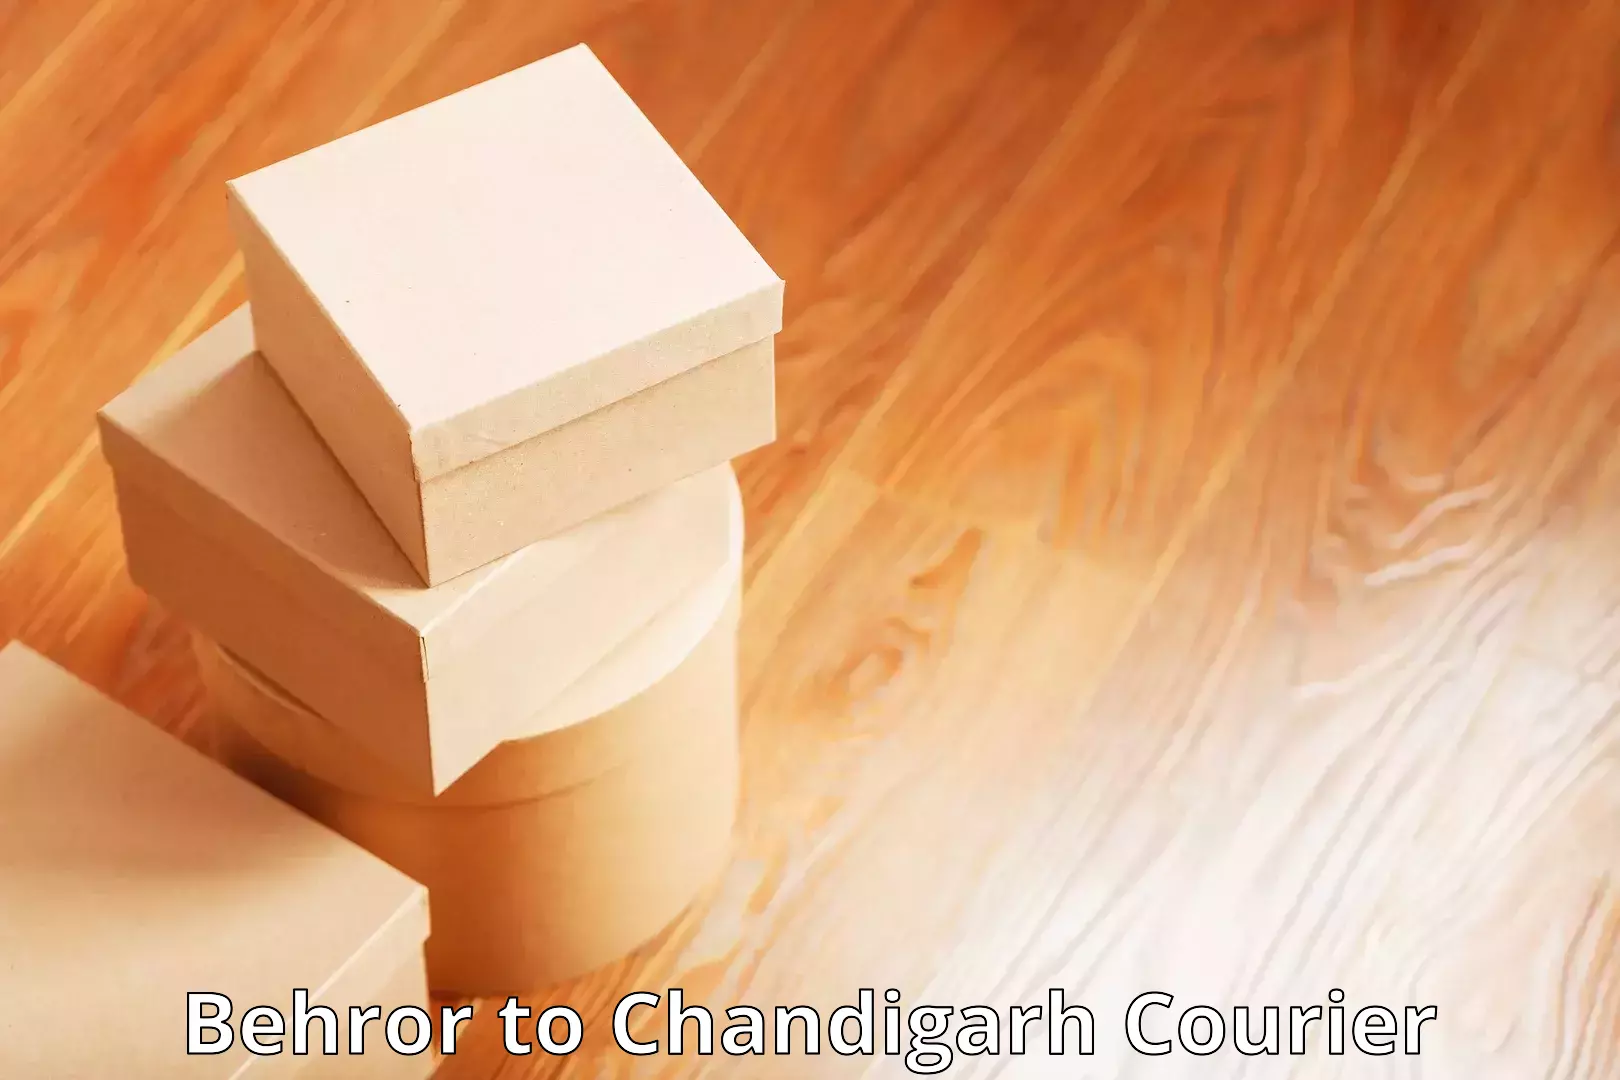 State-of-the-art courier technology Behror to Chandigarh